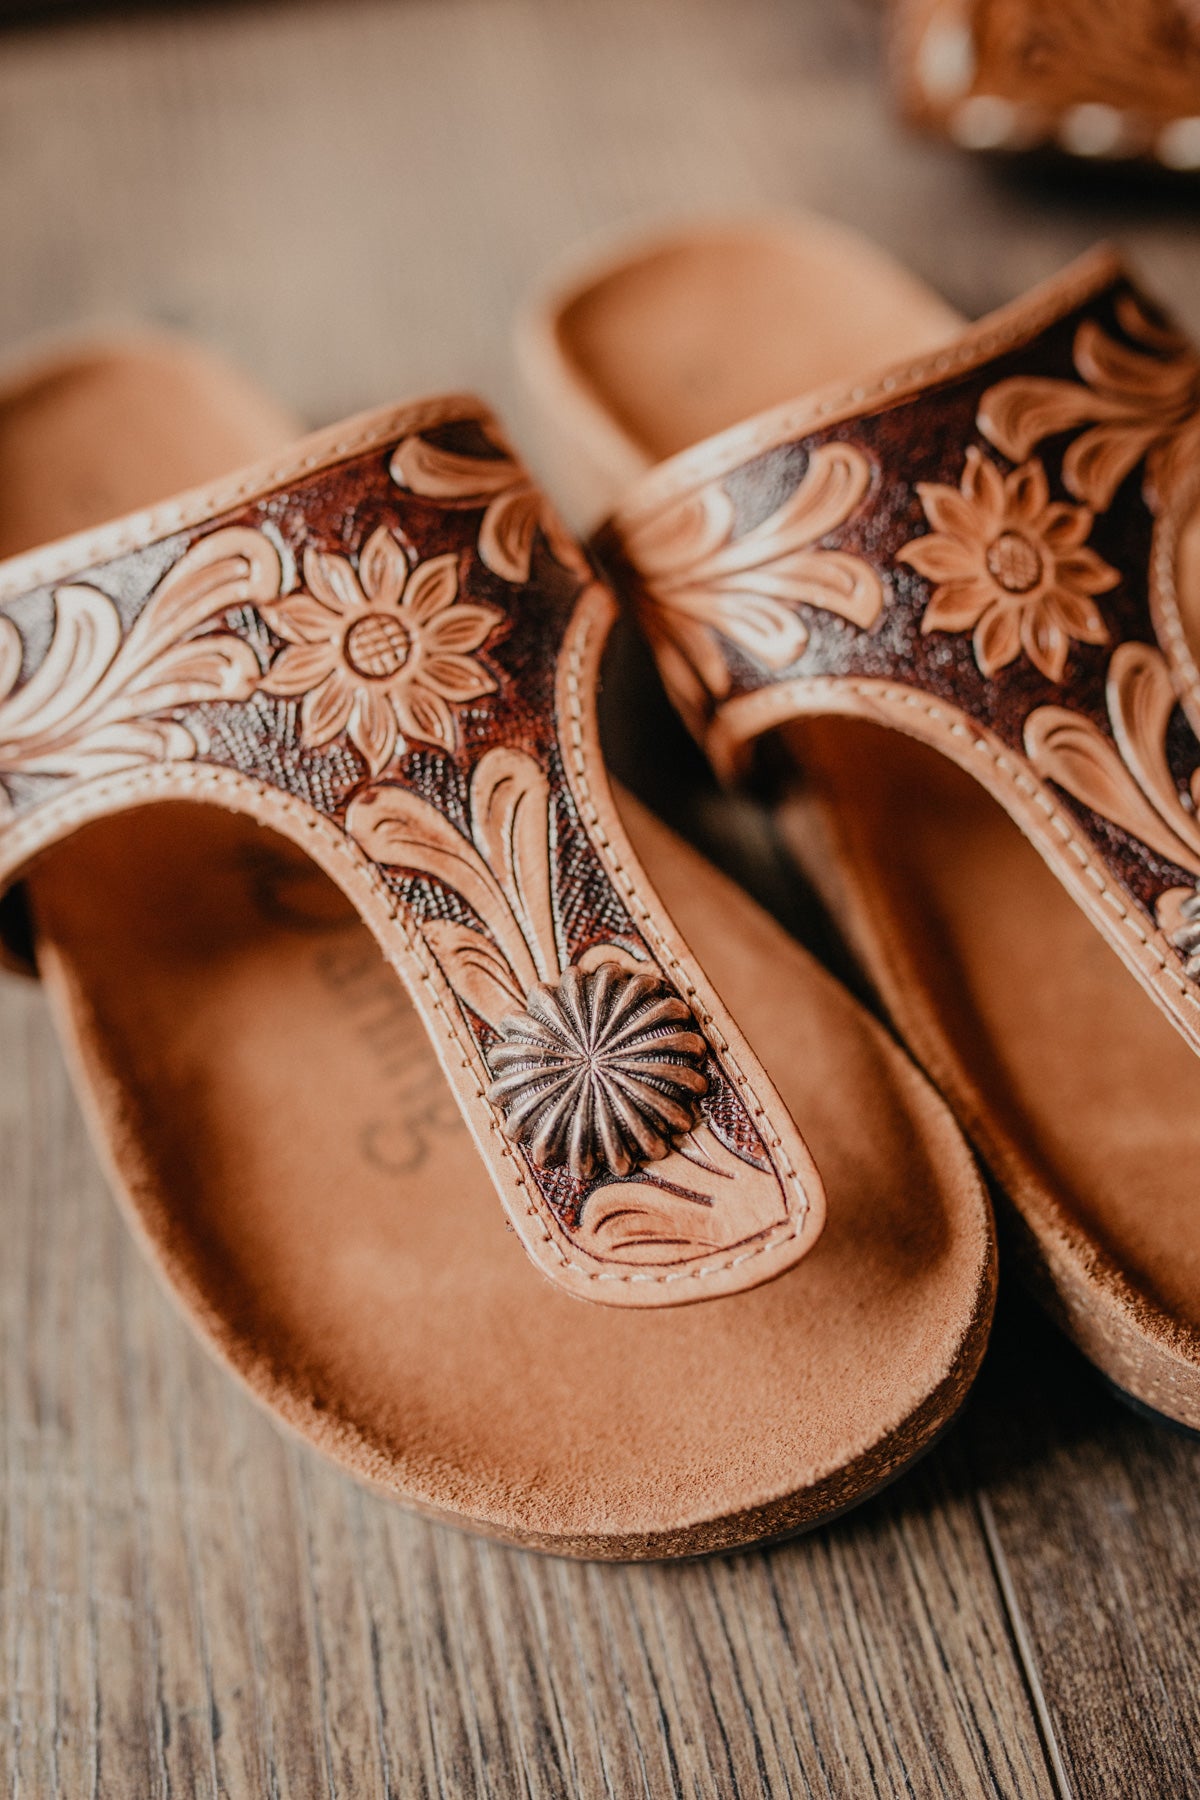 'Priscilla' Floral Tooled Sandals (Size 6 Only)